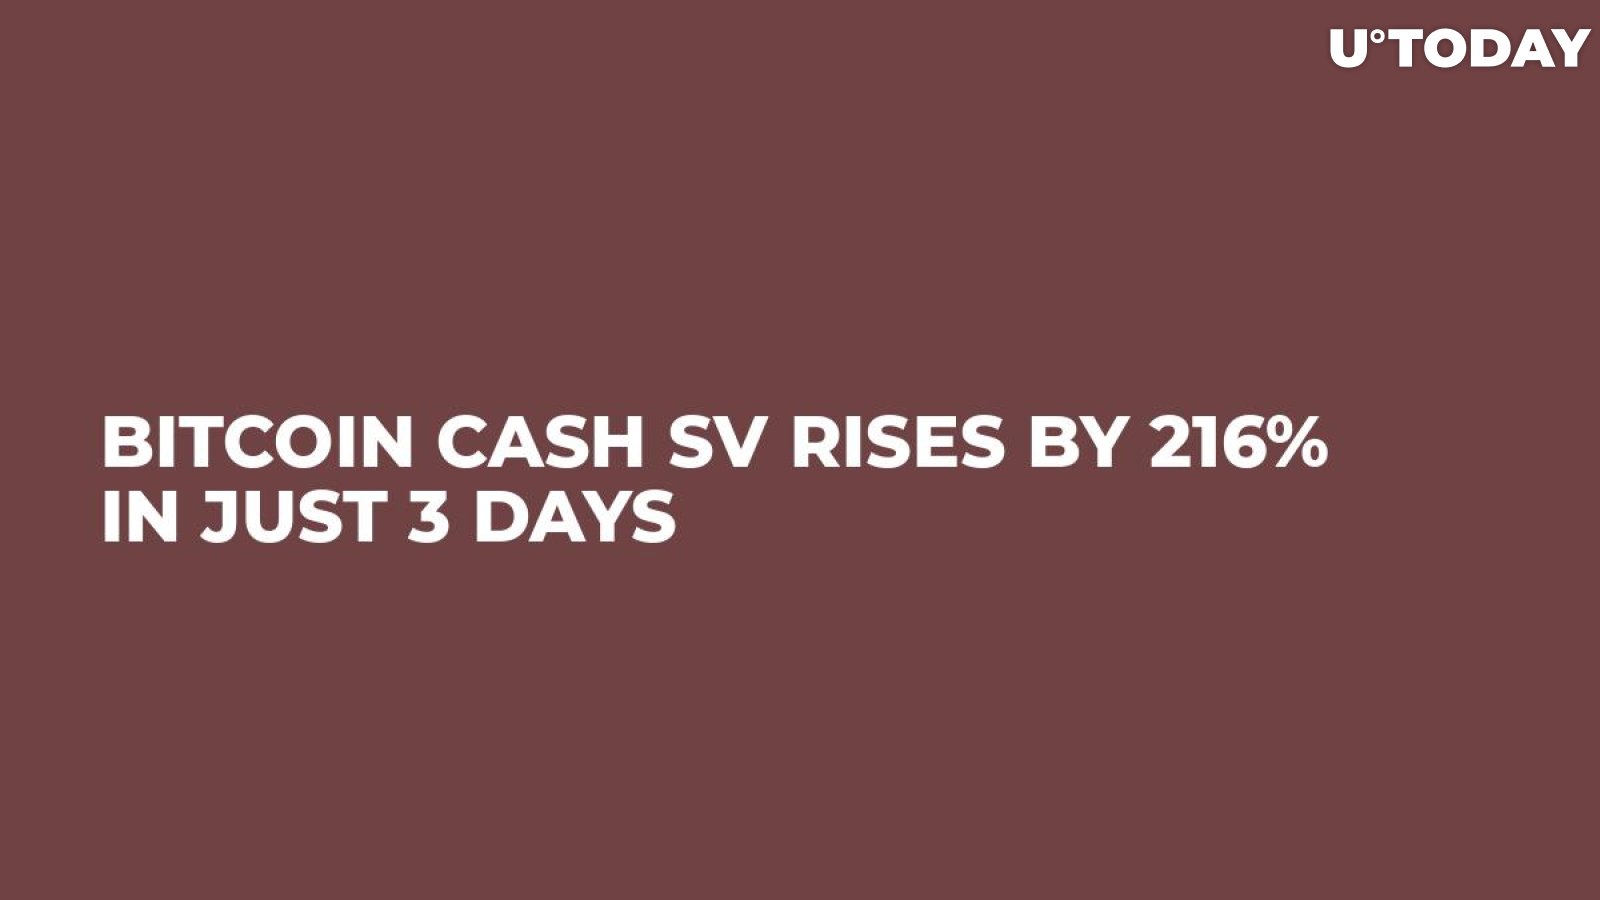 Bitcoin Cash SV Rises by 216% in Just 3 Days